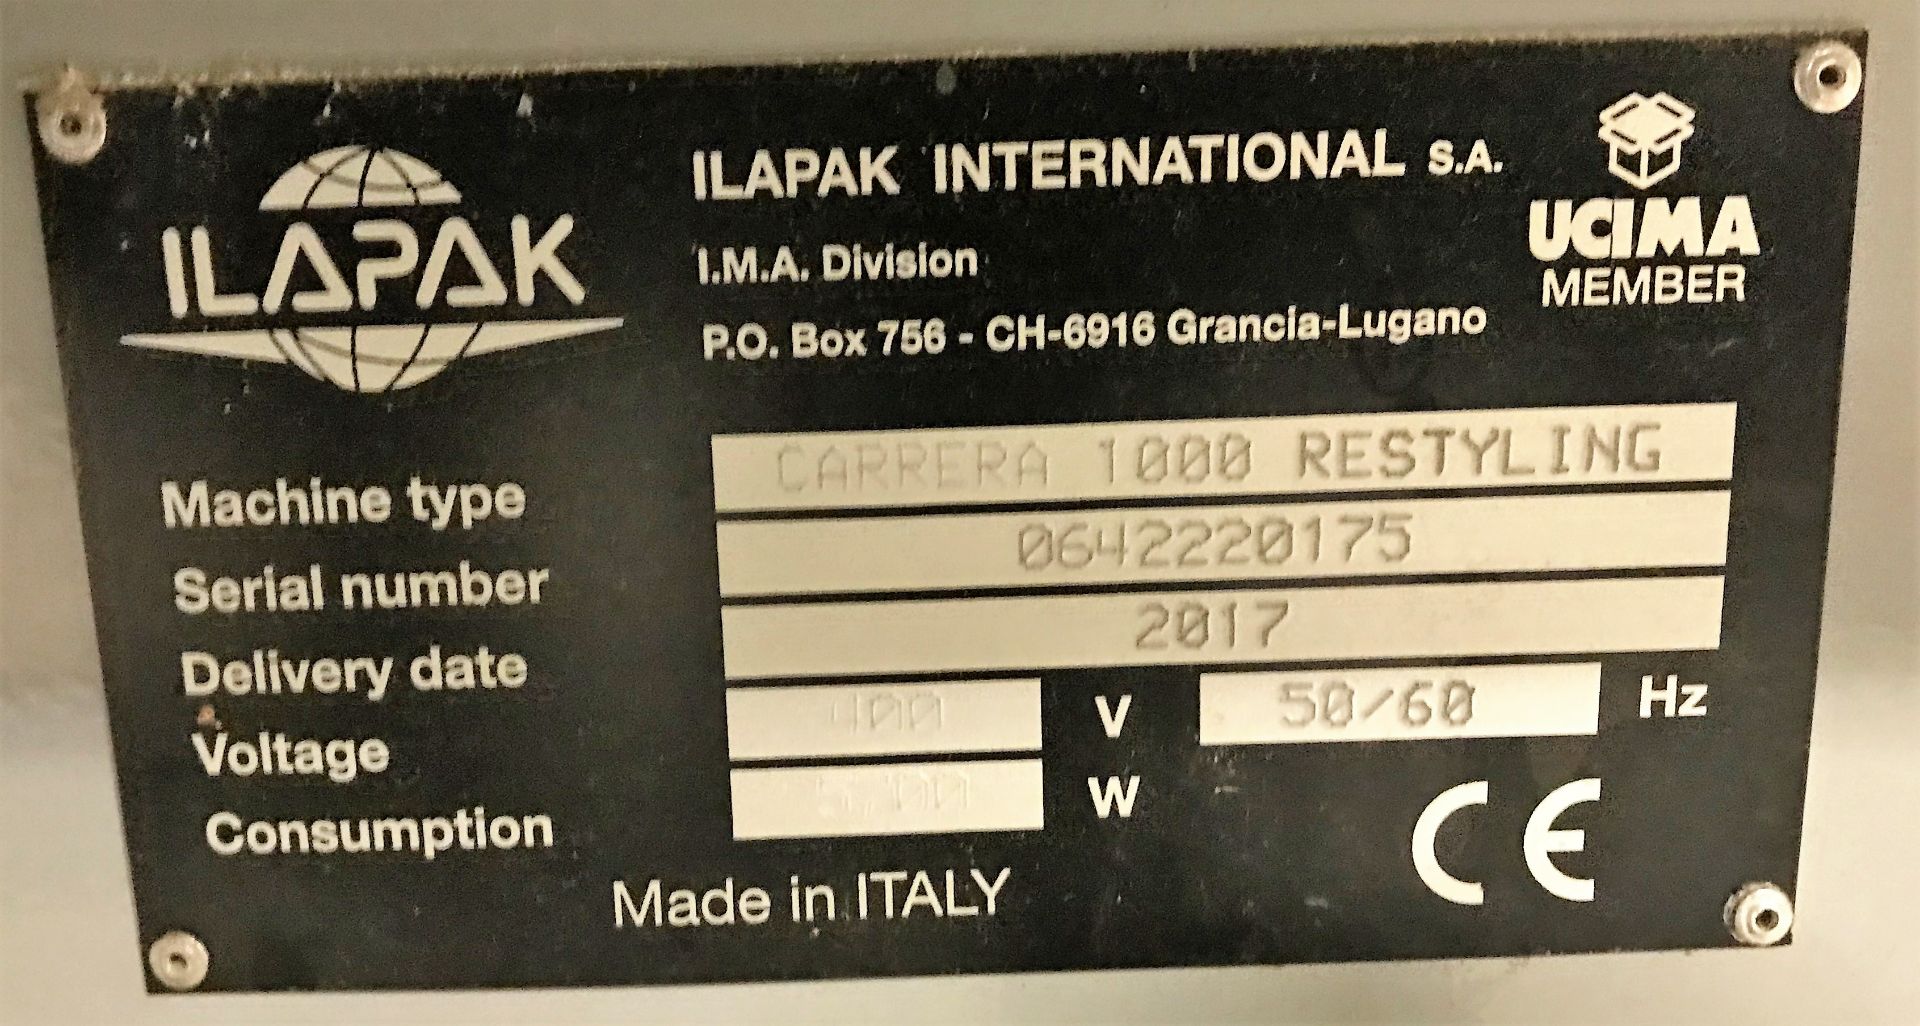 An Ilapak Carrera 1000 Restyling Flow Wrapping Machine No.0642220175 (2017), 3ph-plug in; infeed - Image 7 of 8